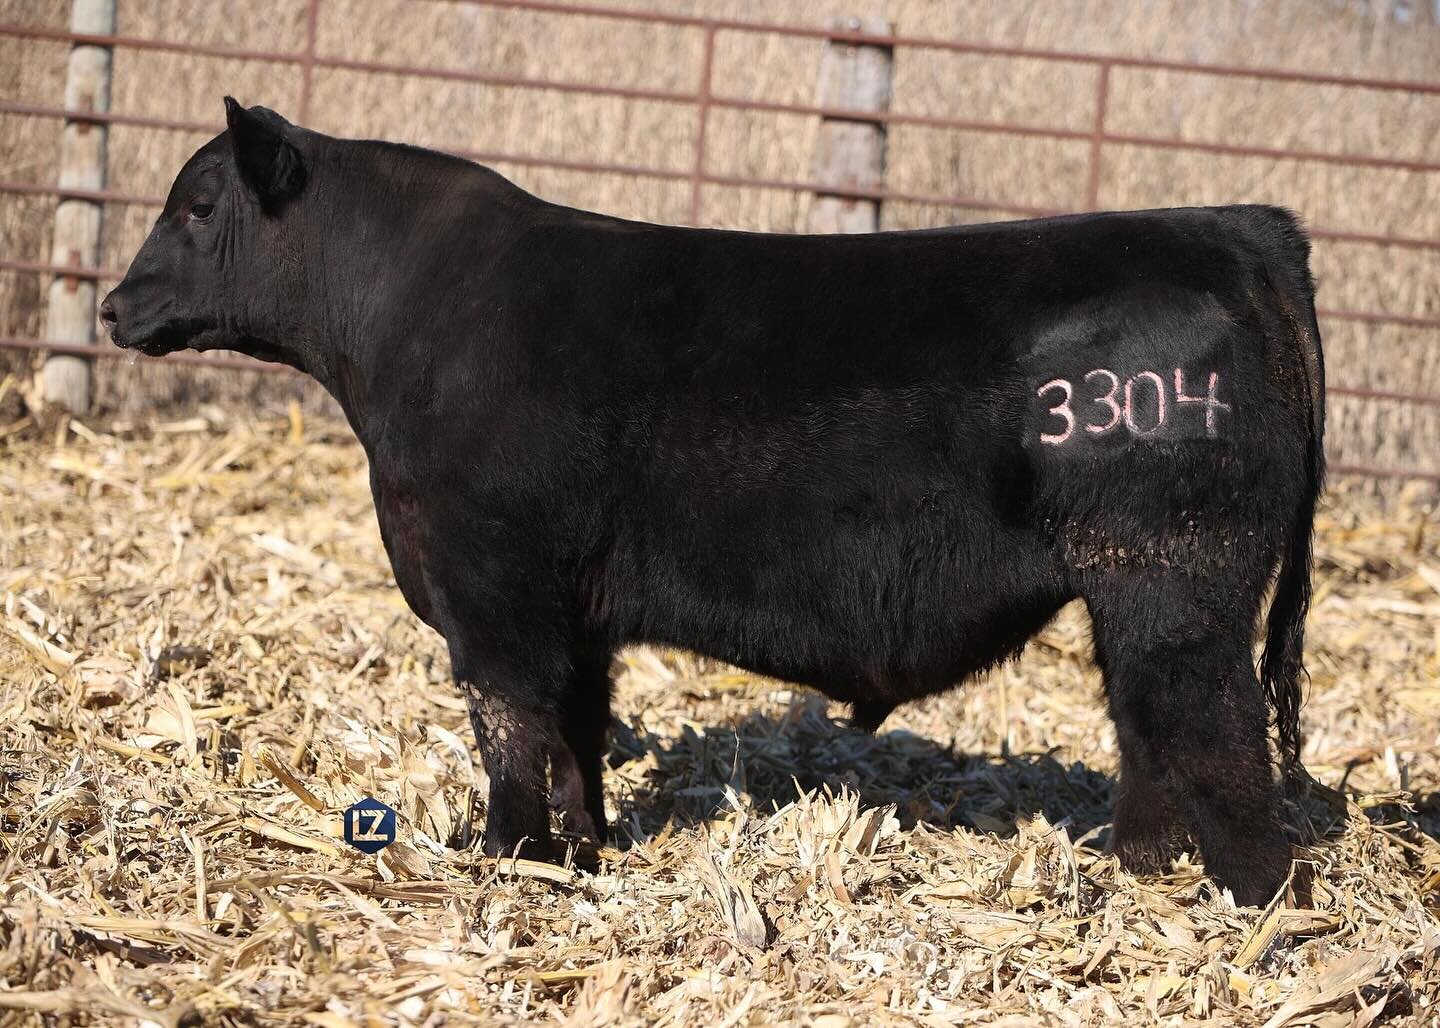 LZ Livestock Lot 3304 is a result of a flush we did on our 801F Cowboy Cut female (pictured above)  to CLRS Homeland 327H. We think 3304 has an impressive phenotype with a powerful genetic profile any simmental breeder can appreciate!

View more deta